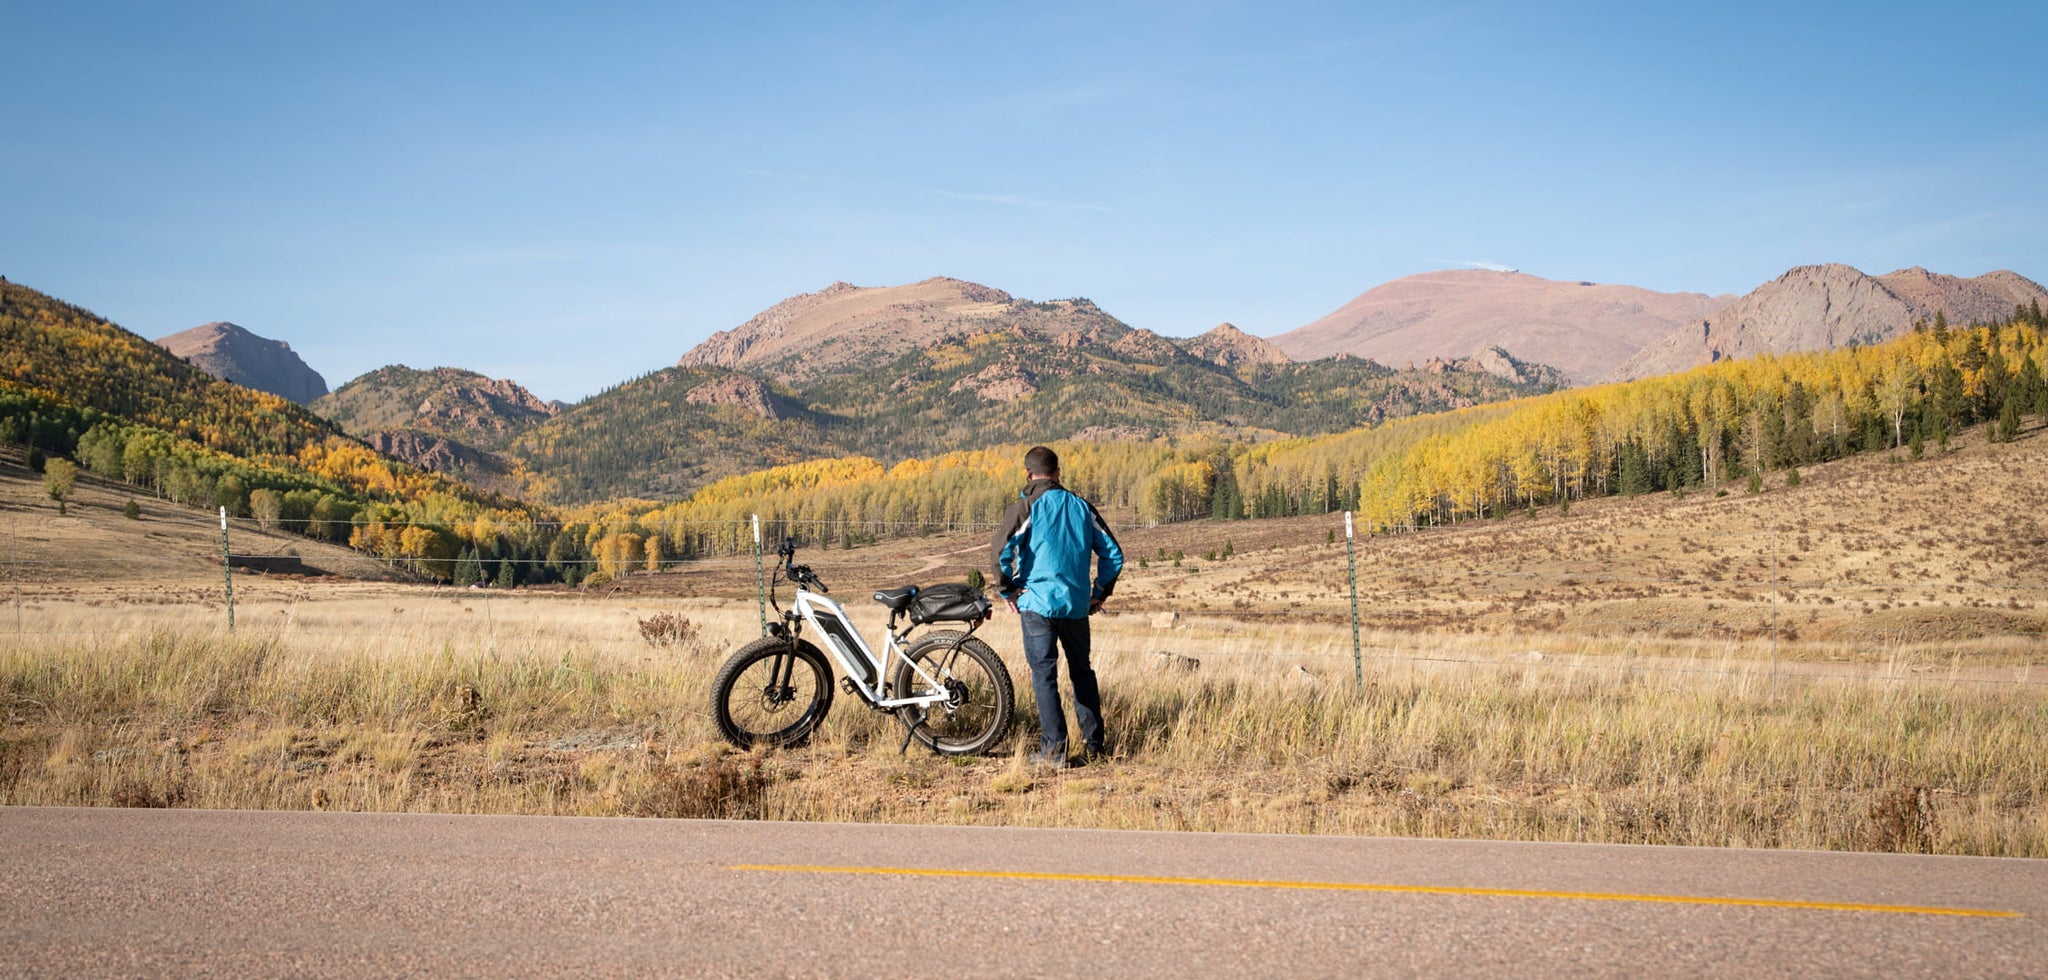 E-Bike Adventures in U.S. National Parks: What You Should Know